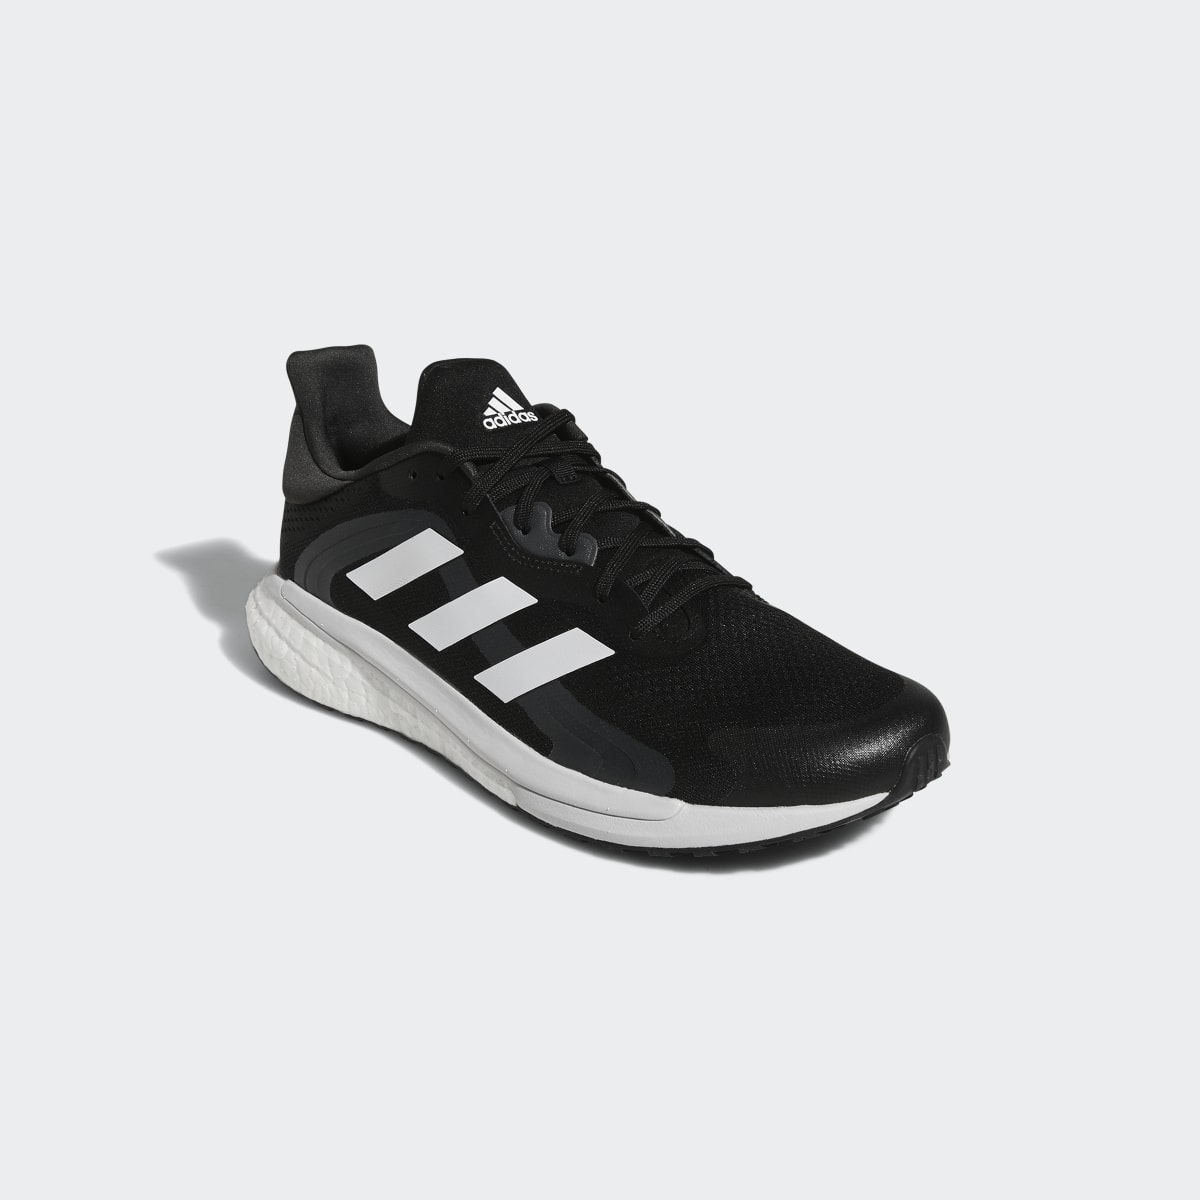 Adidas Sapatilhas SolarGlide 4 ST. 13